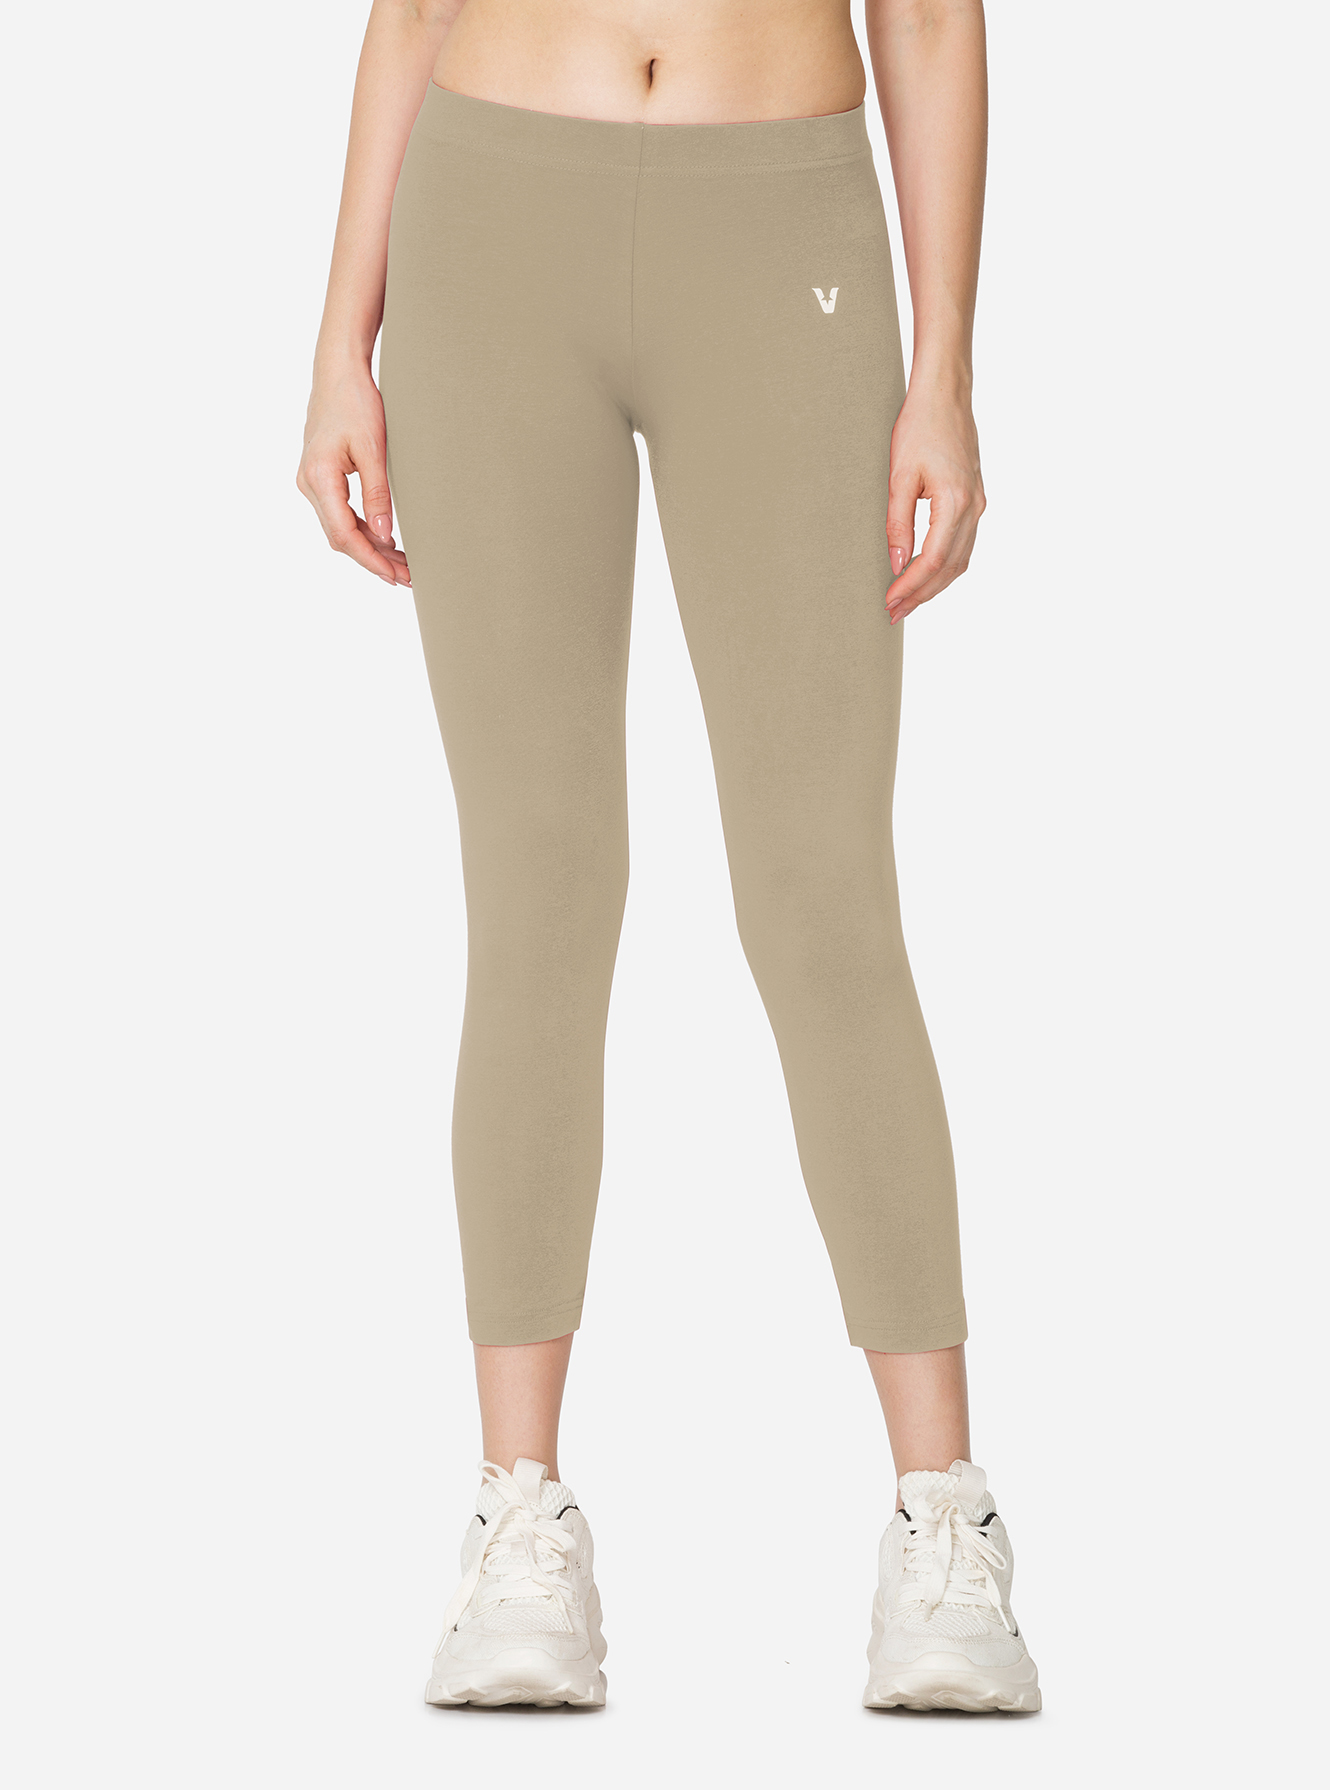 Cropped stretchable leggings